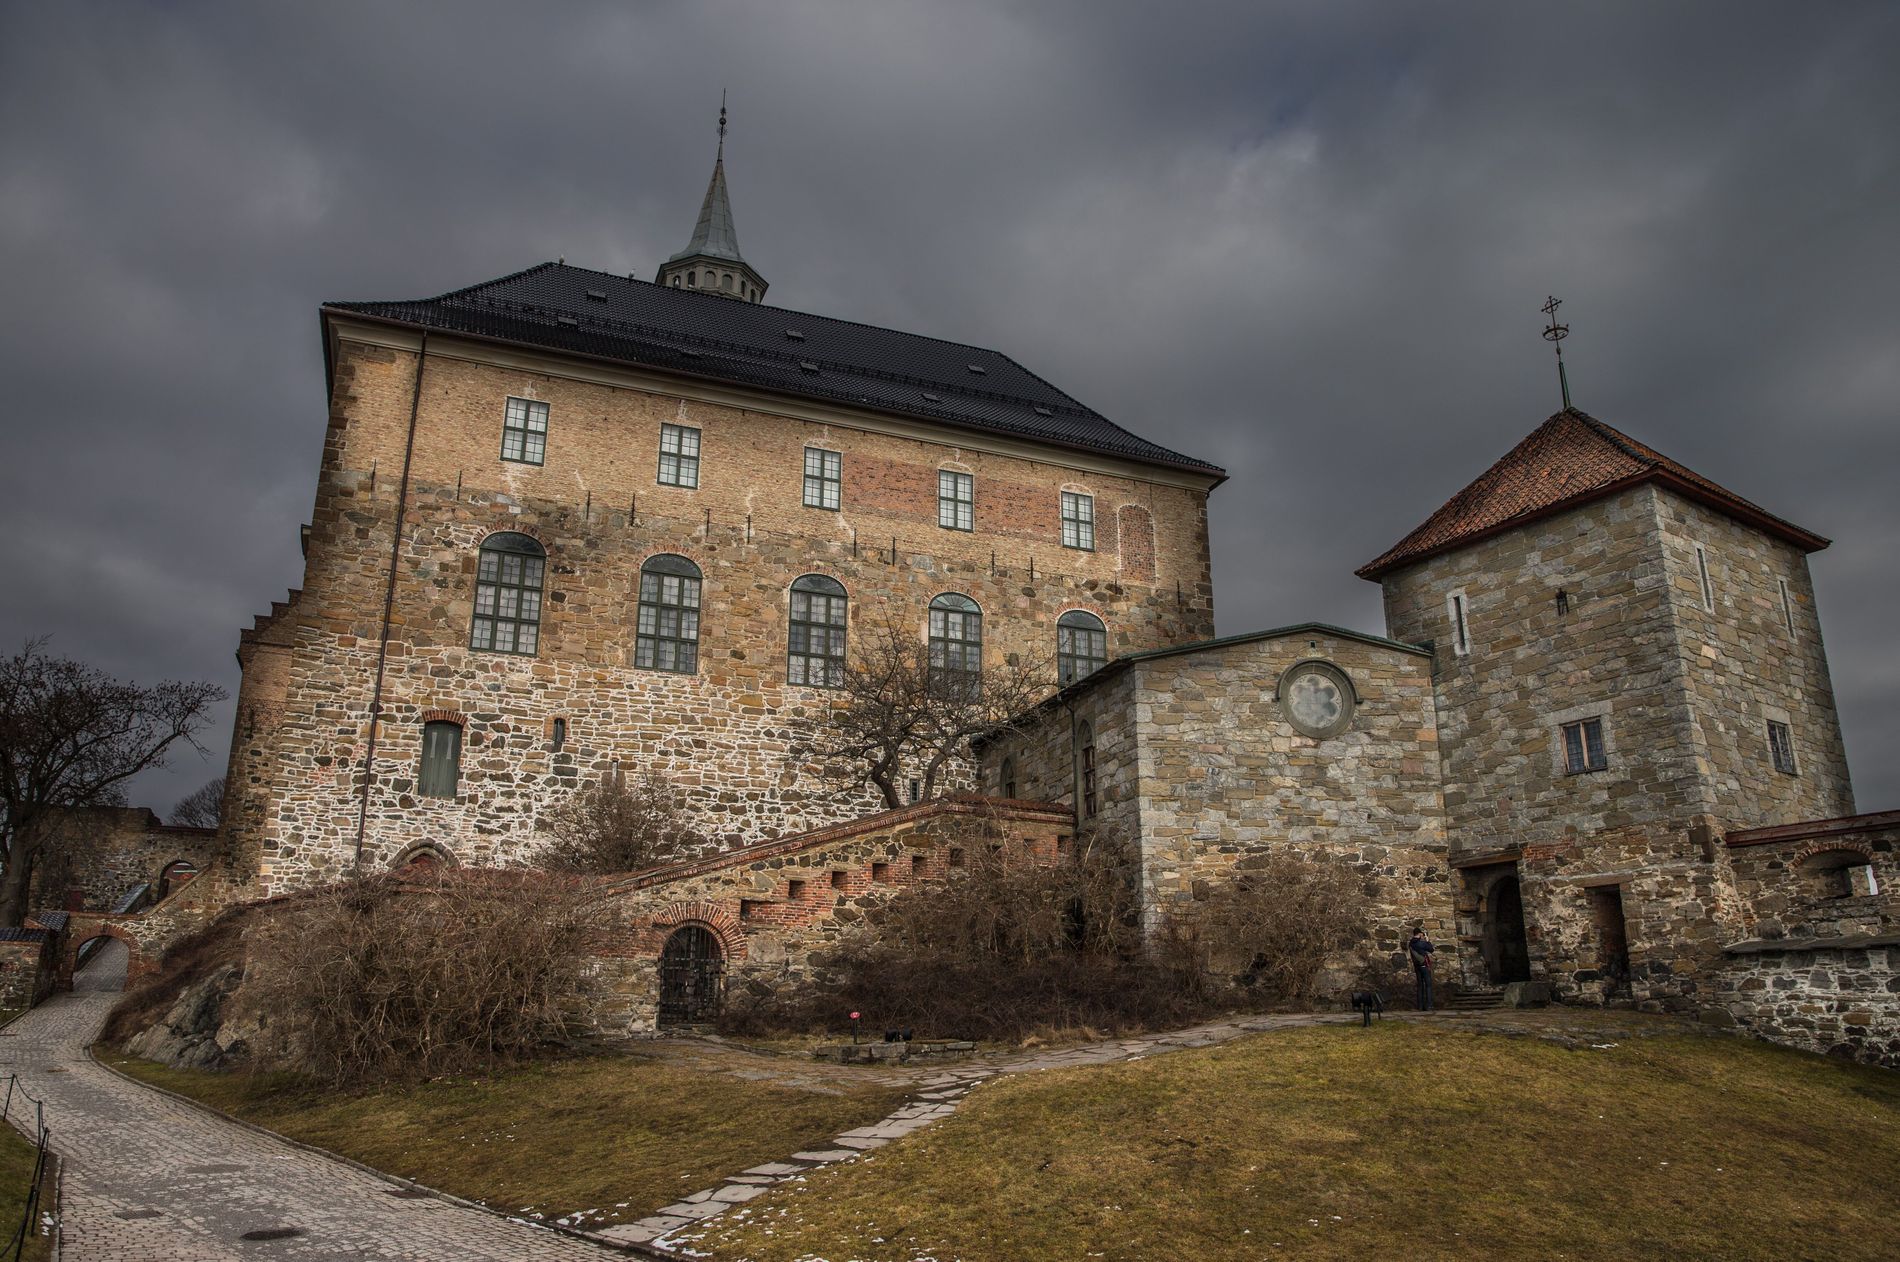 Akershus Slott, Oslo's medieval castle and fortress